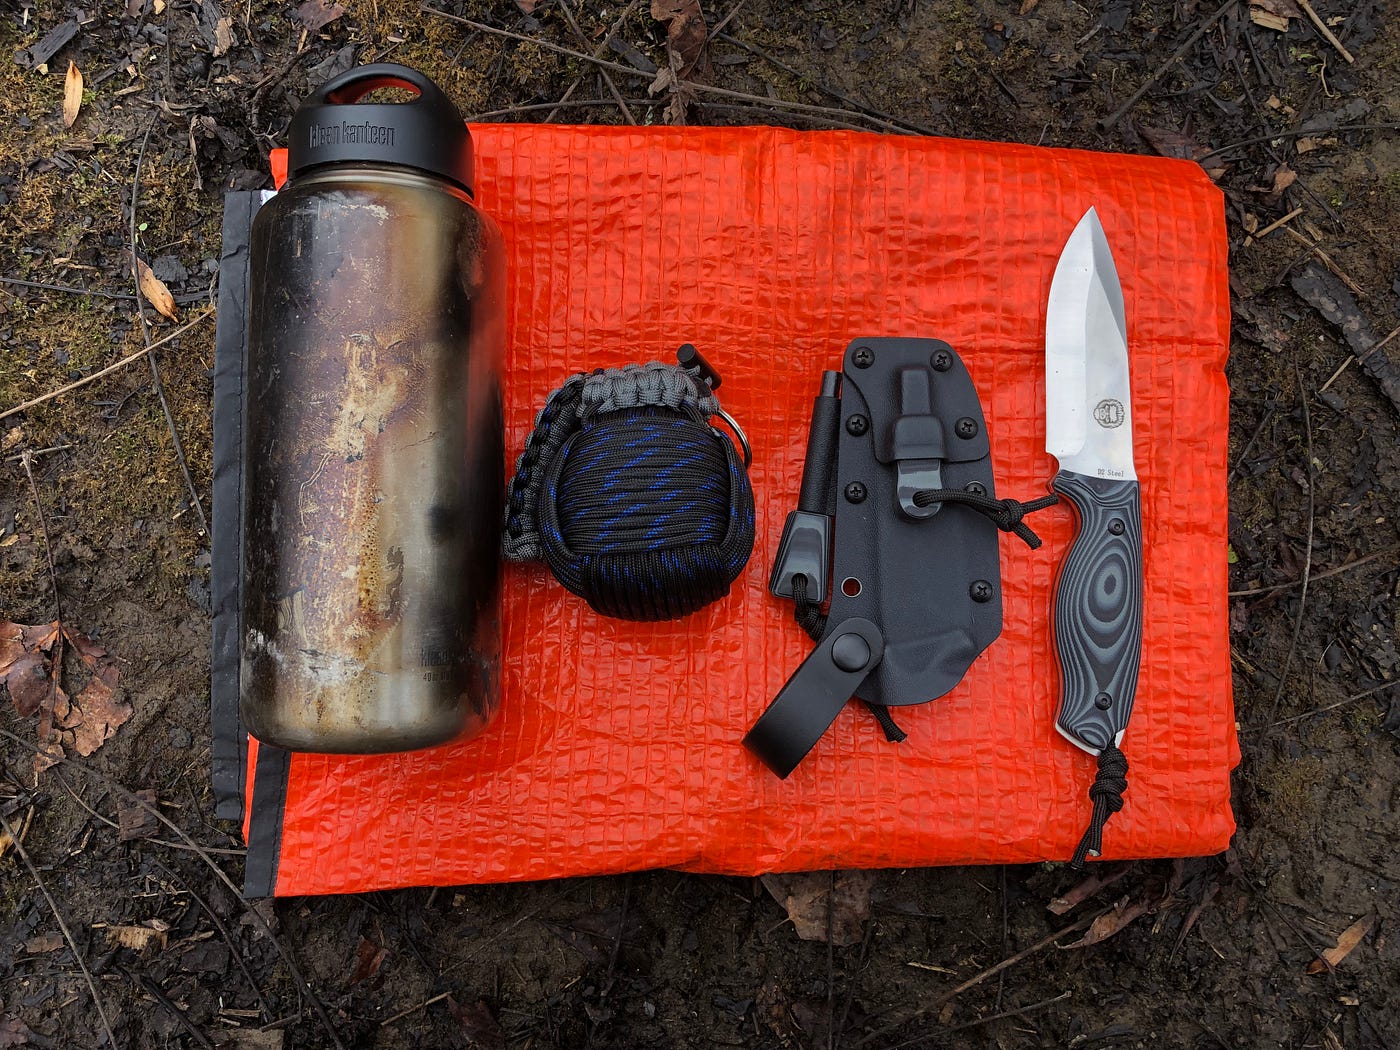 My Bushcraft Scout Kit for 2022. Time to hit the dirt!, by Alex Heninger